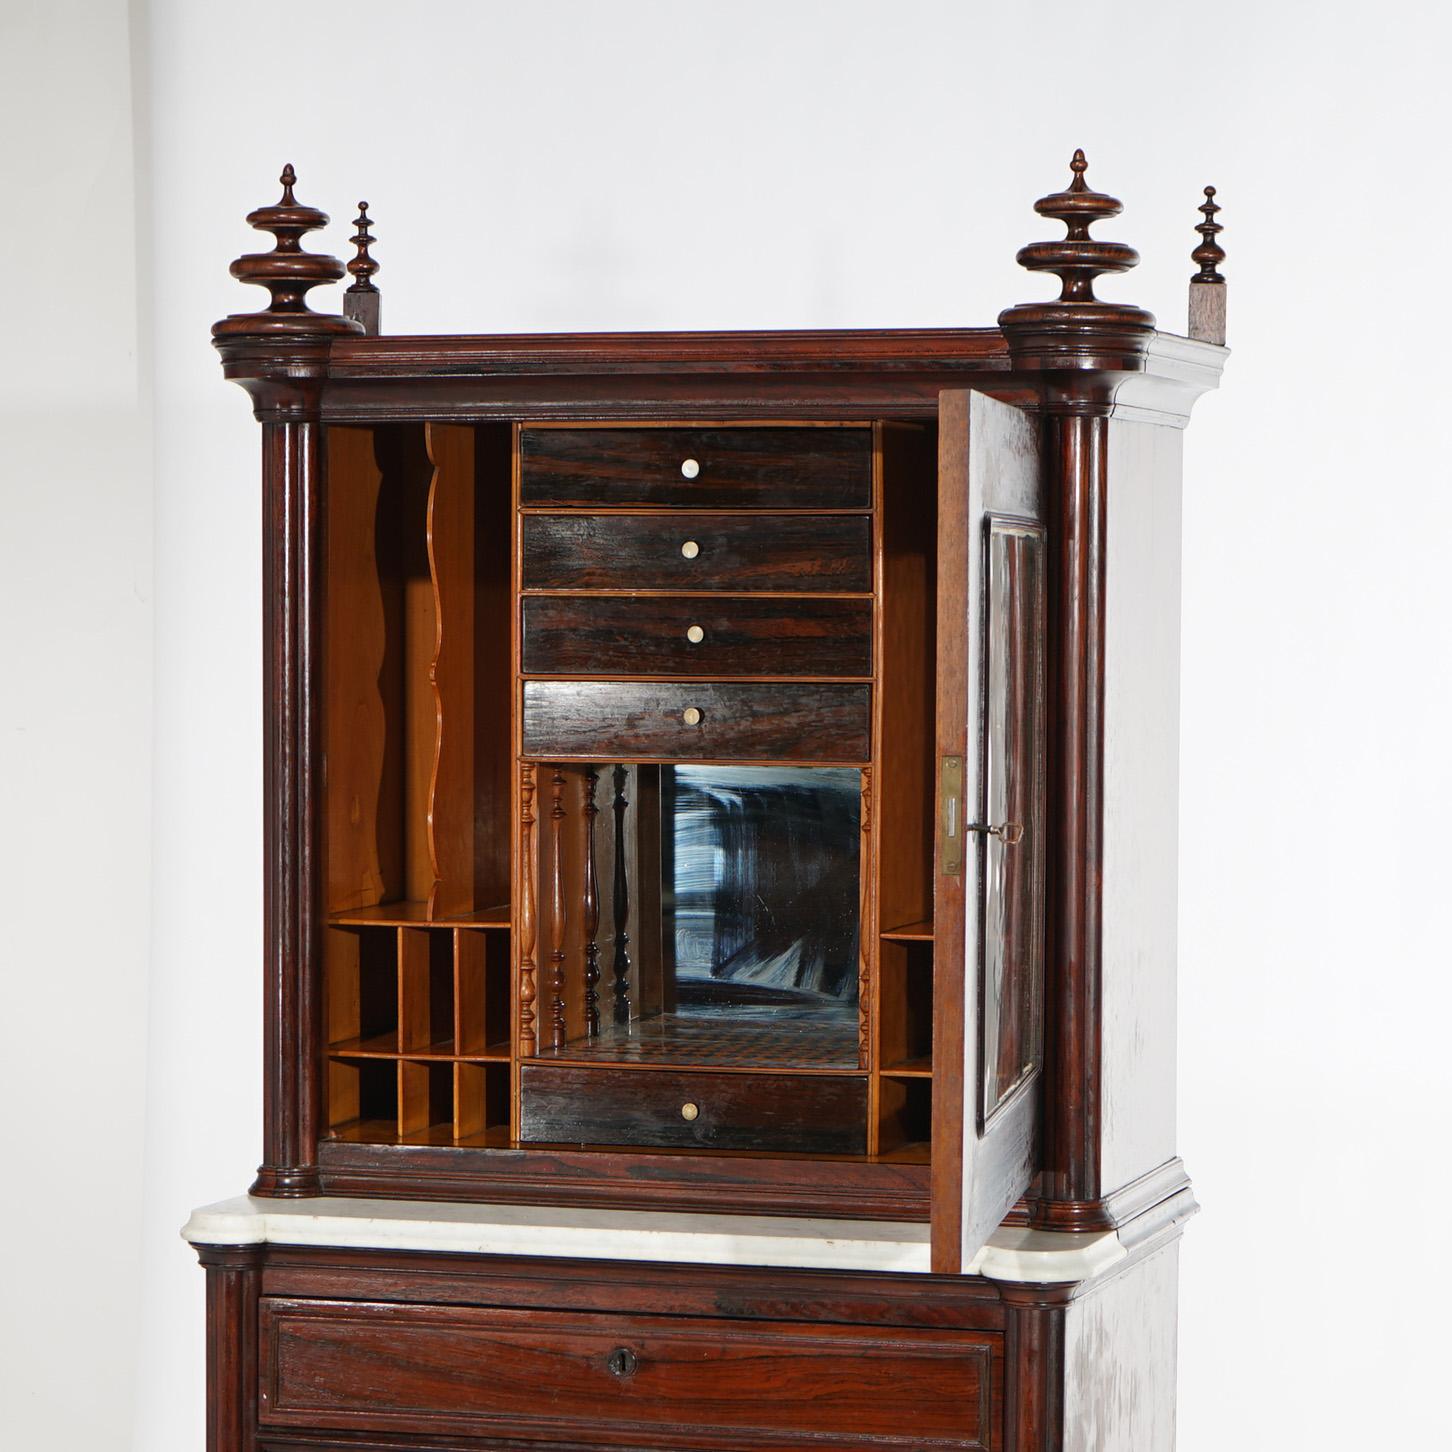 An antique Gothic Revival secretary offers rosewood construction with upper having stylized finials over case with double glass doors opening to mirrored interior with storage compartments over marble top lower case, c1850

Measures- 67.5''H x